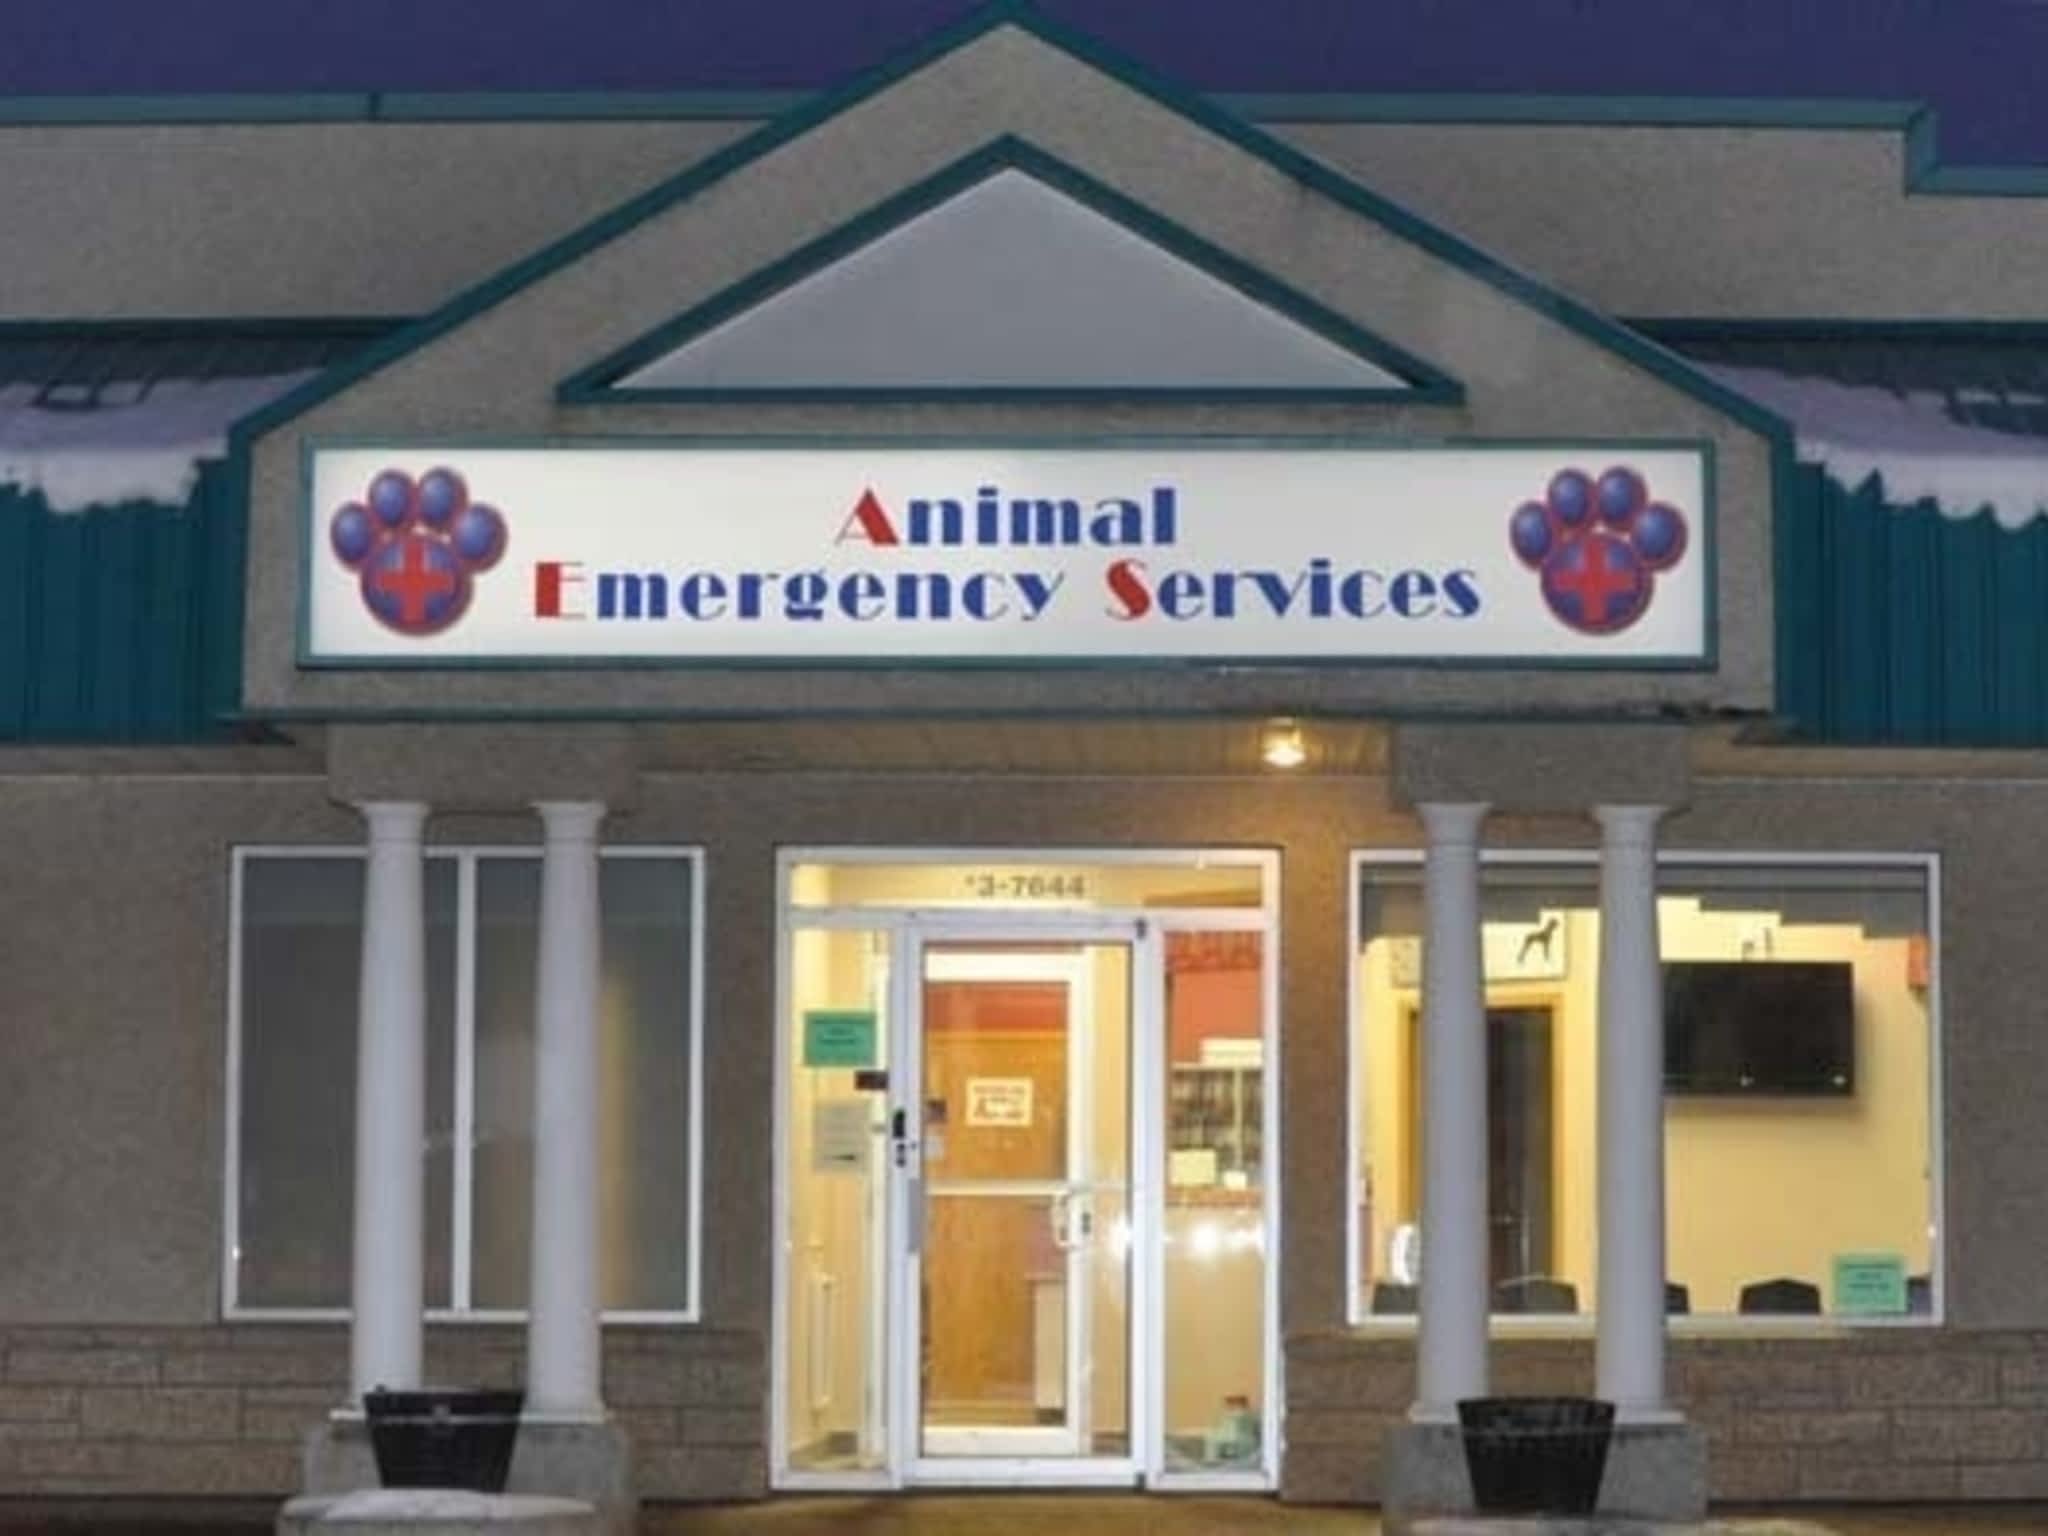 Animal Emergency Hospital Red Deer, AB 37644 50 Ave Canpages